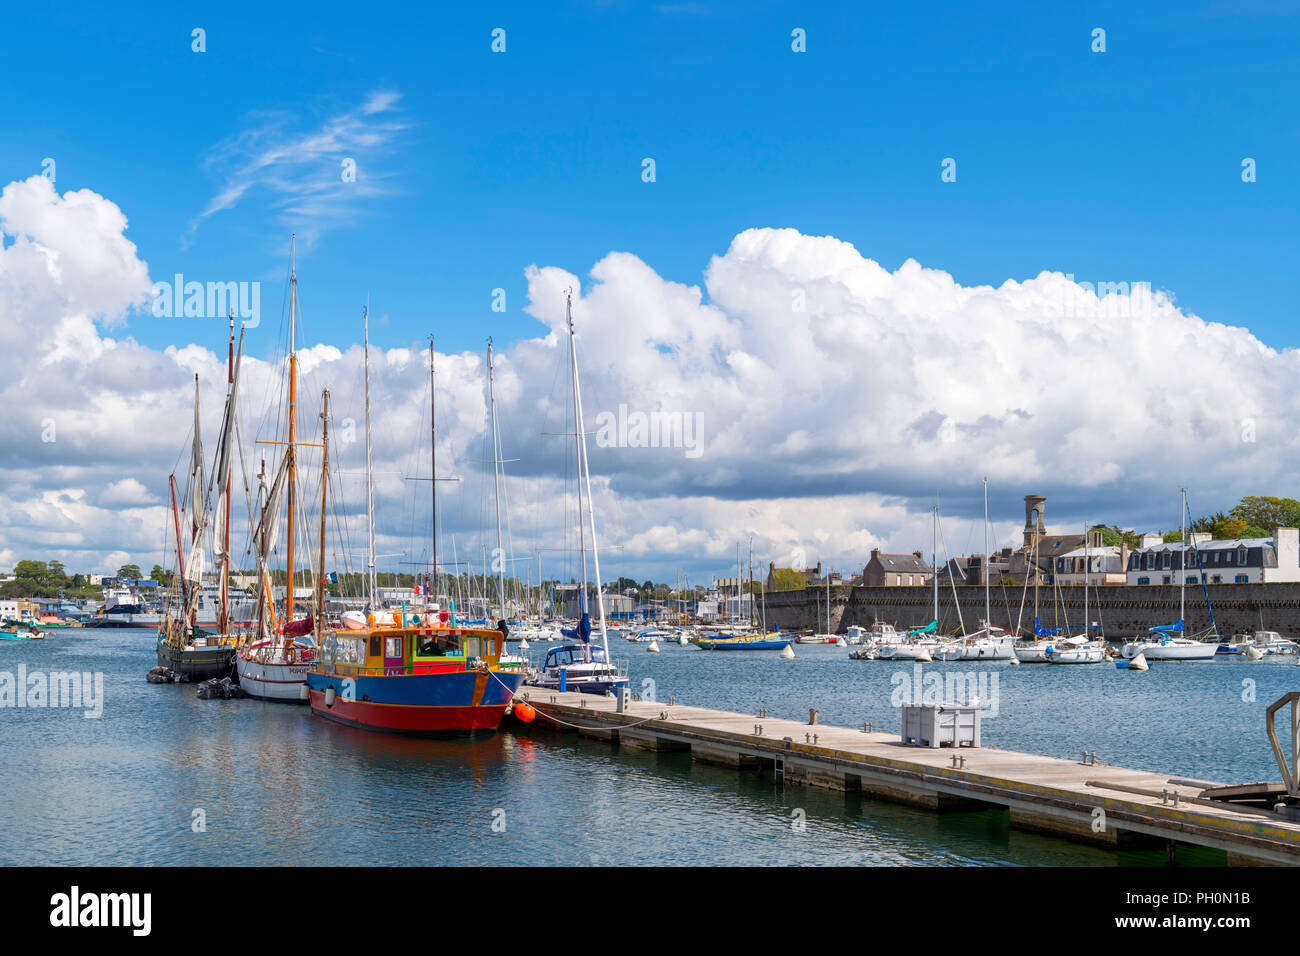 The harbour looking towards the historic old city (ville close), Concarneau, Finistere, Brittany, France Stock Photo